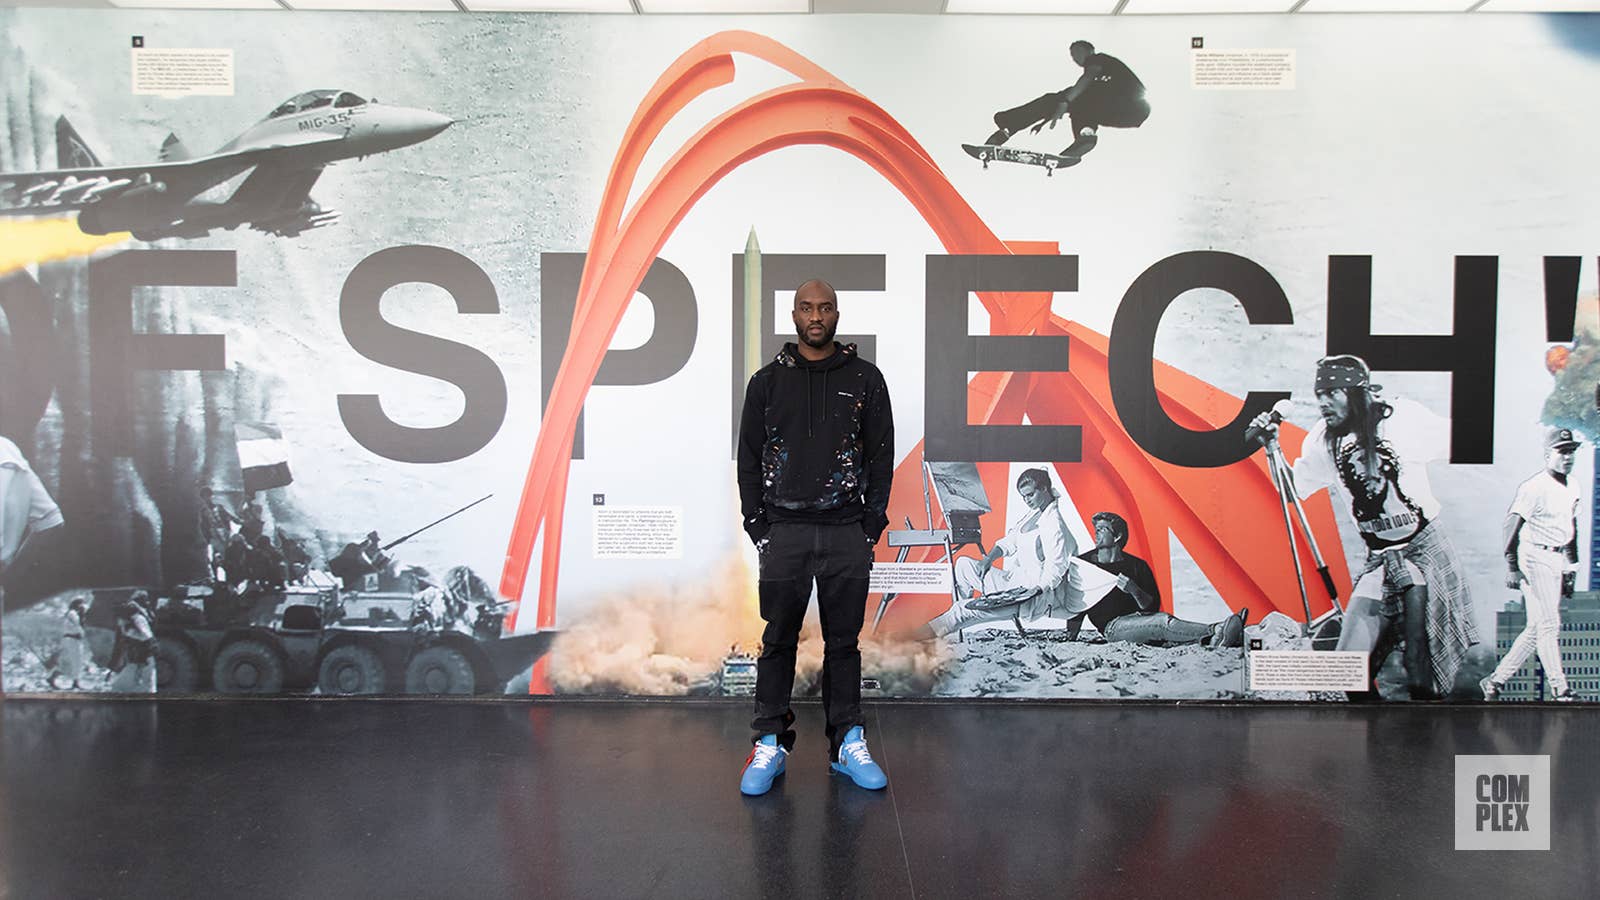 Sketch)Notes from Virgil Abloh's Figures of Speech Exhibition at